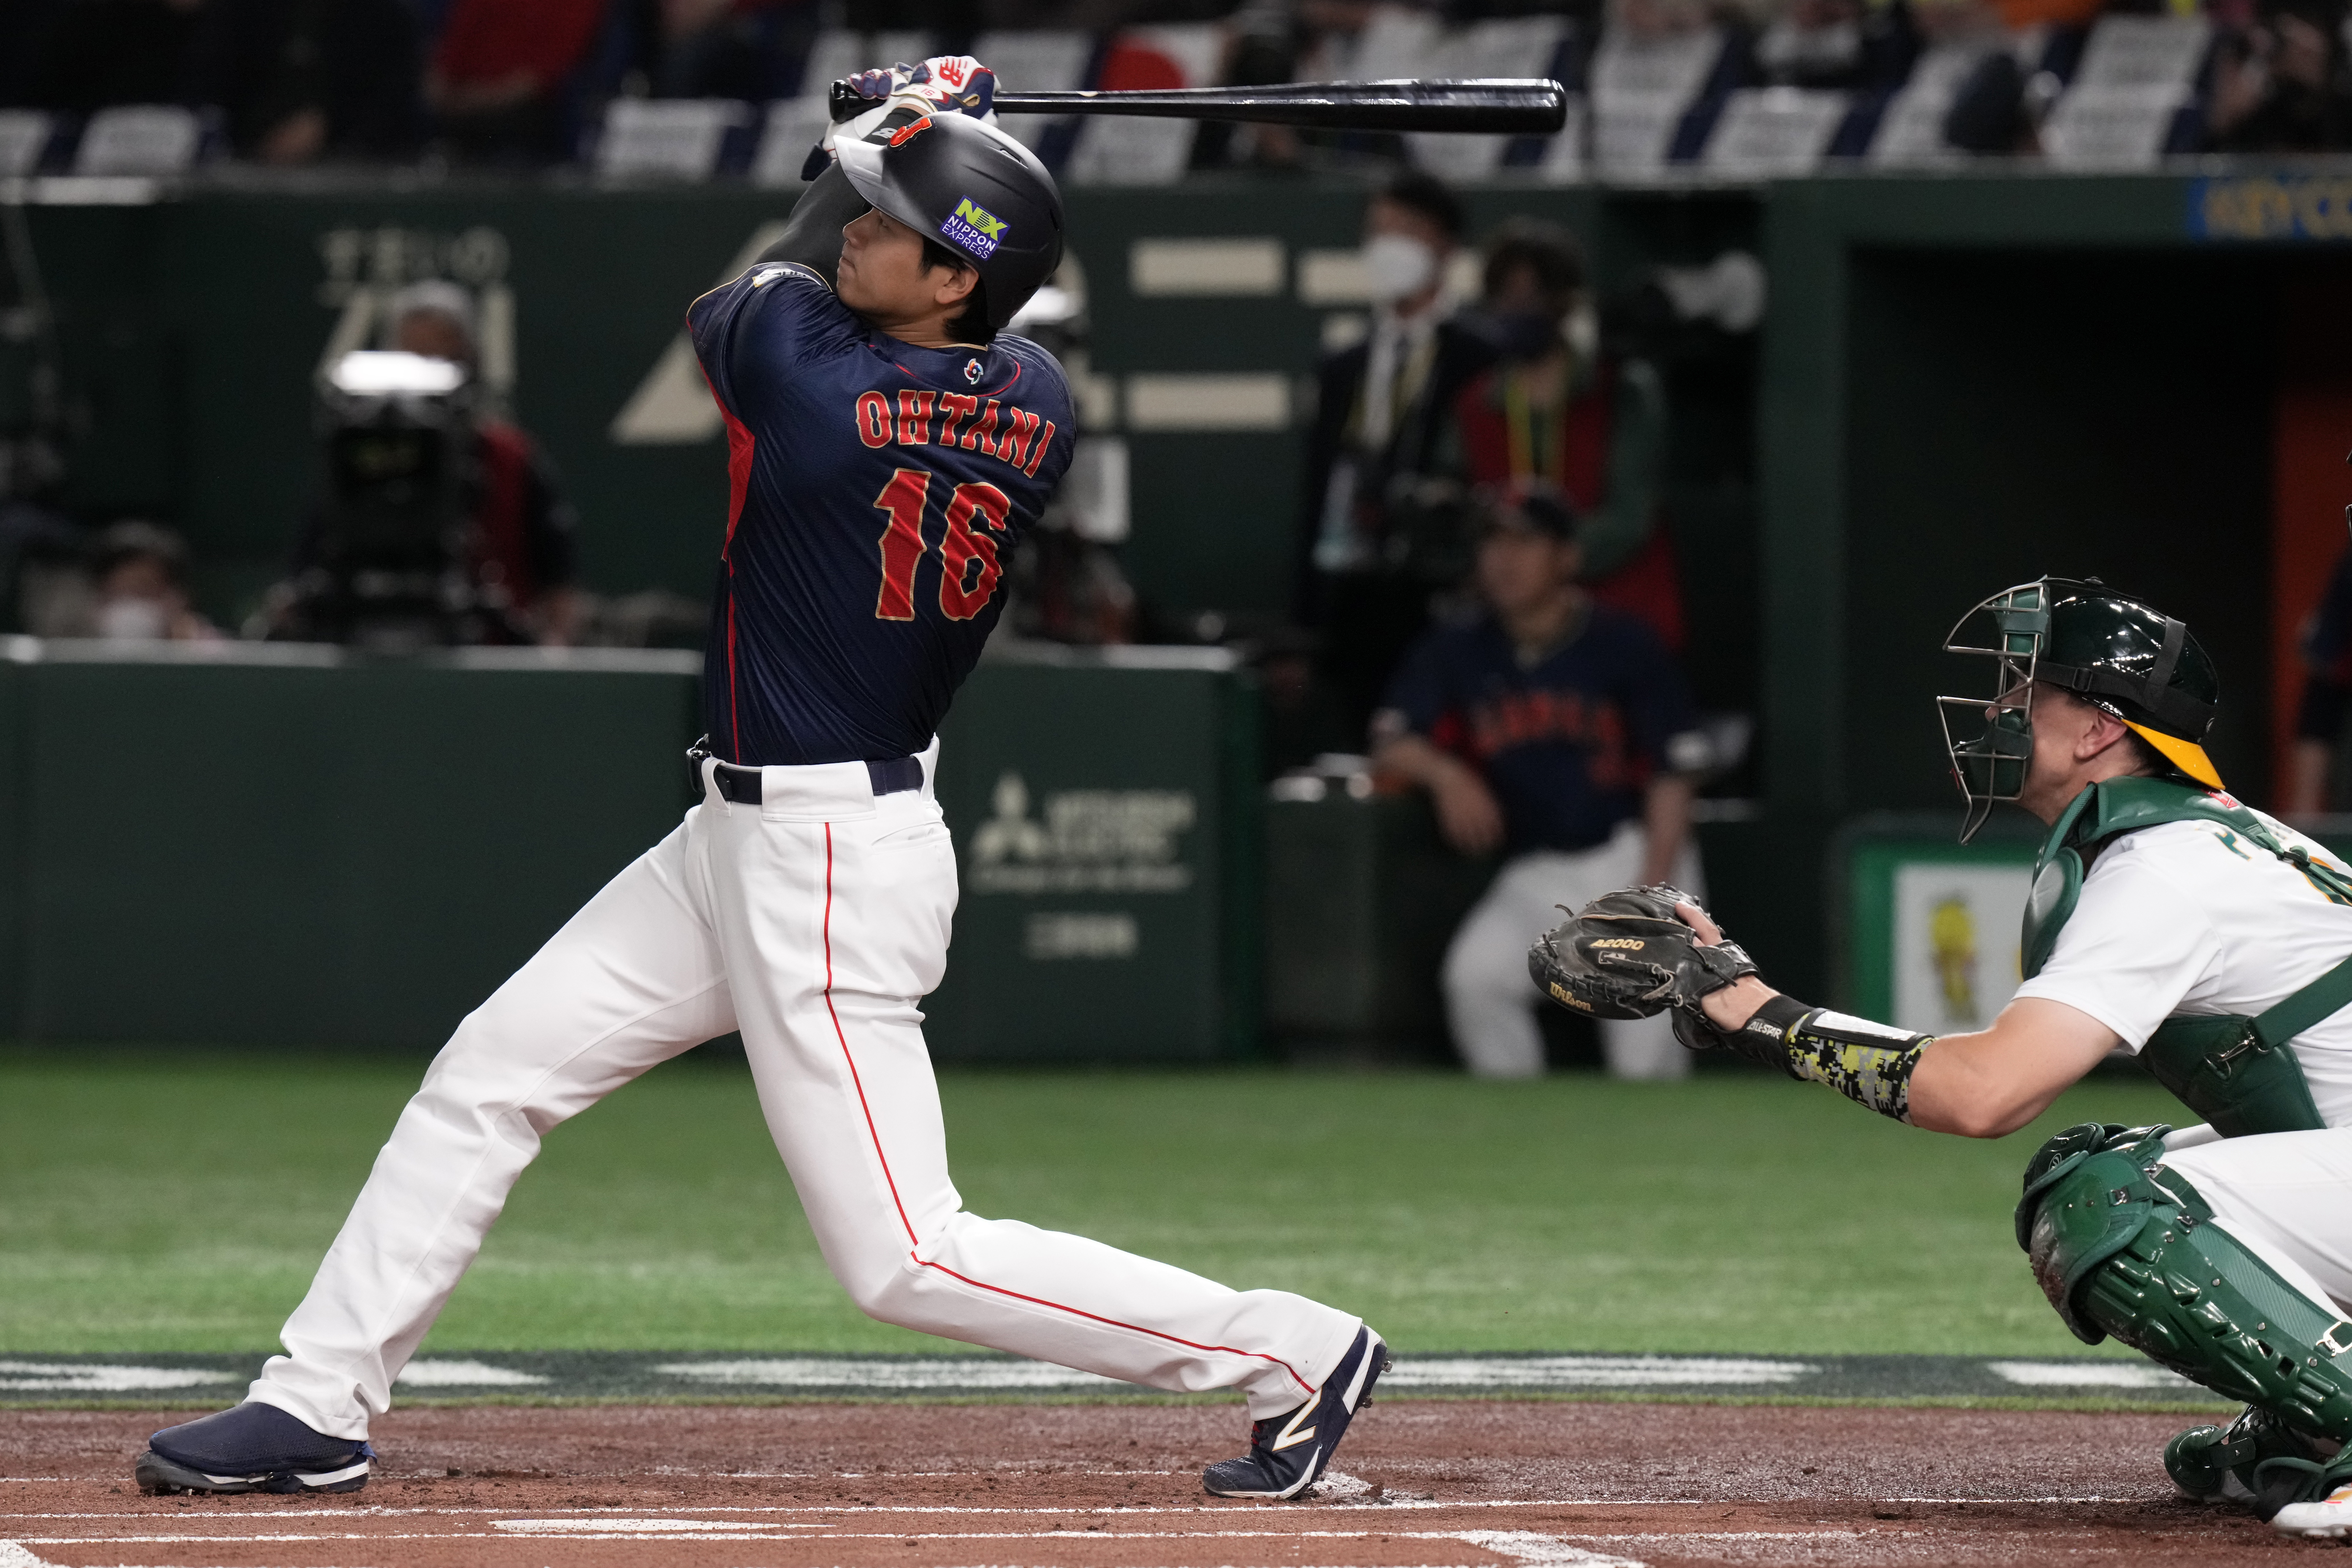 Ohtani's long HR powers Japan to group win at WBC